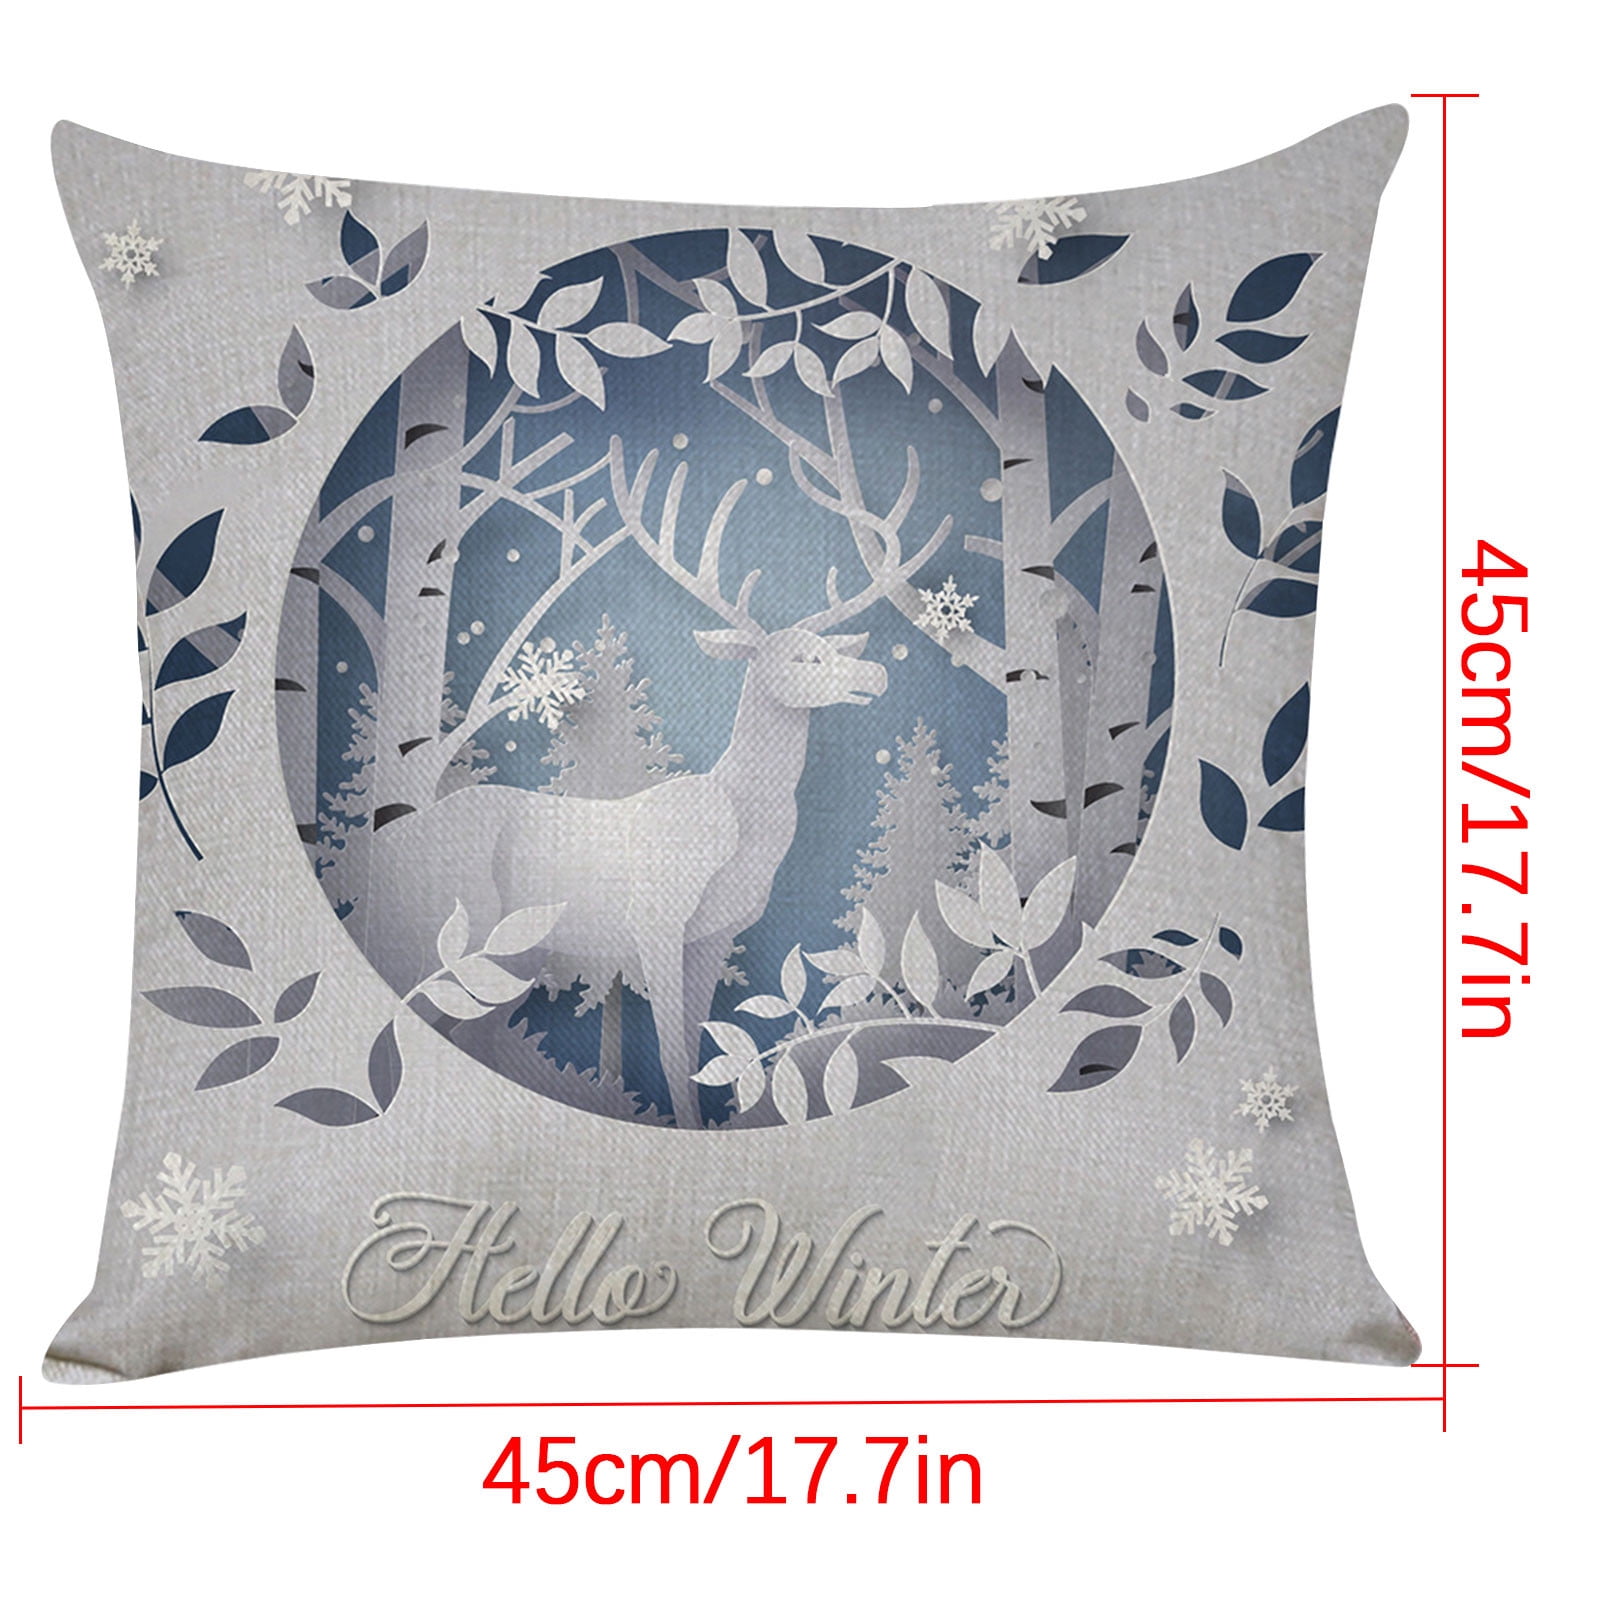 Chair Cushion Cover, Pillow Covers, Decorative Pillow Covers 18x18 inch  (45x45 cm) Blue, Cotton Throw Pillow Covers, Handmade Pillow Covers,  Traditional, Animal Print - Blue Elephant 